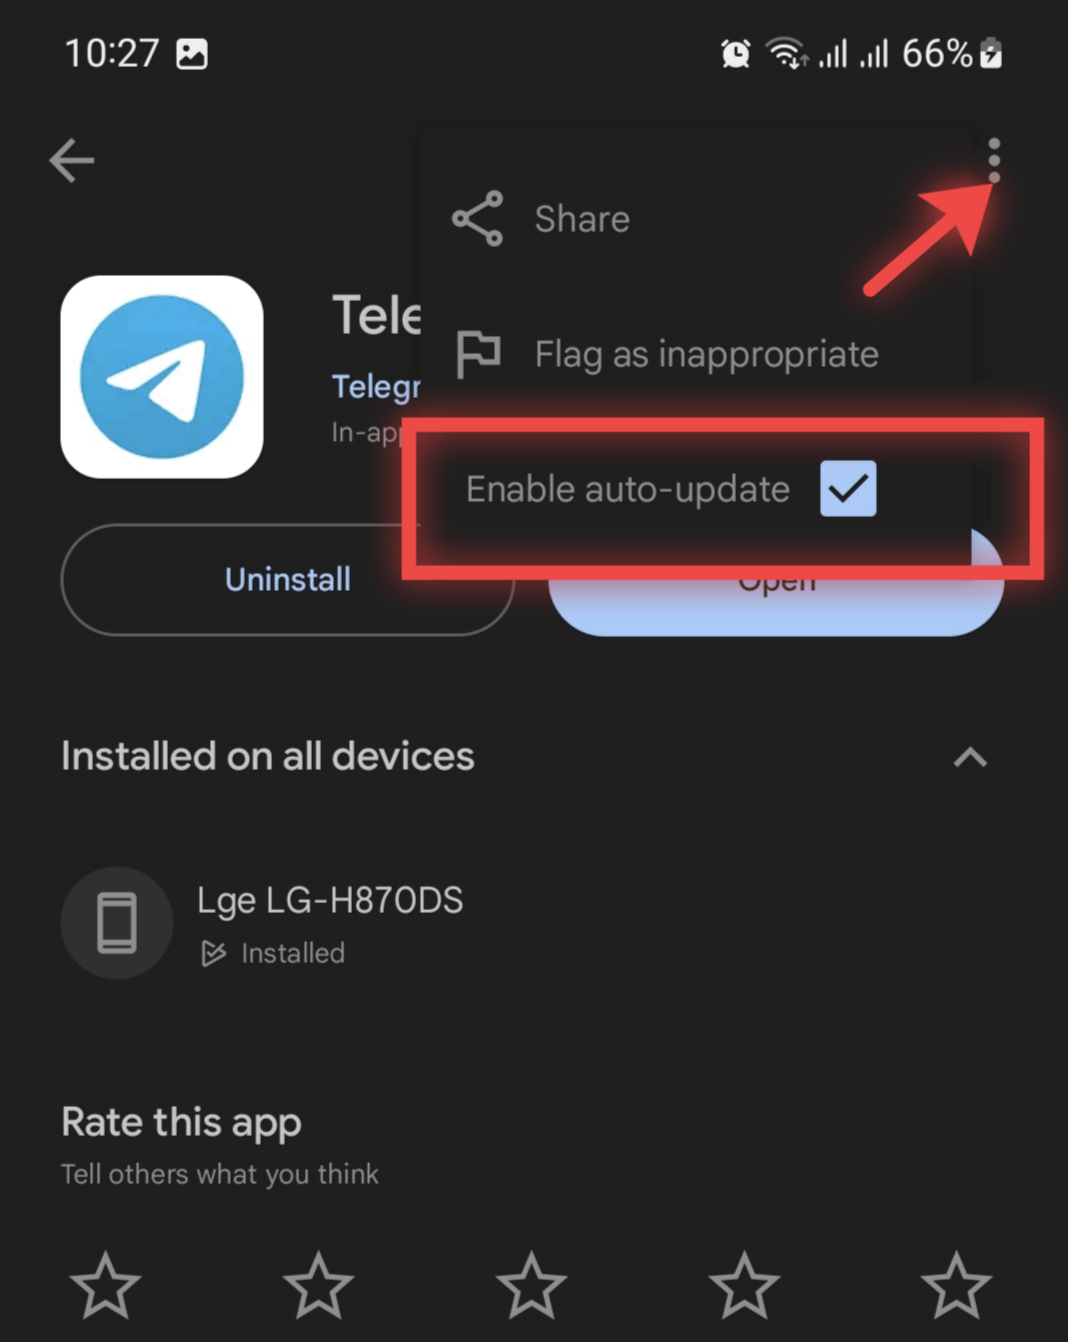 tap on the 3 dots tovEnable auto-update option